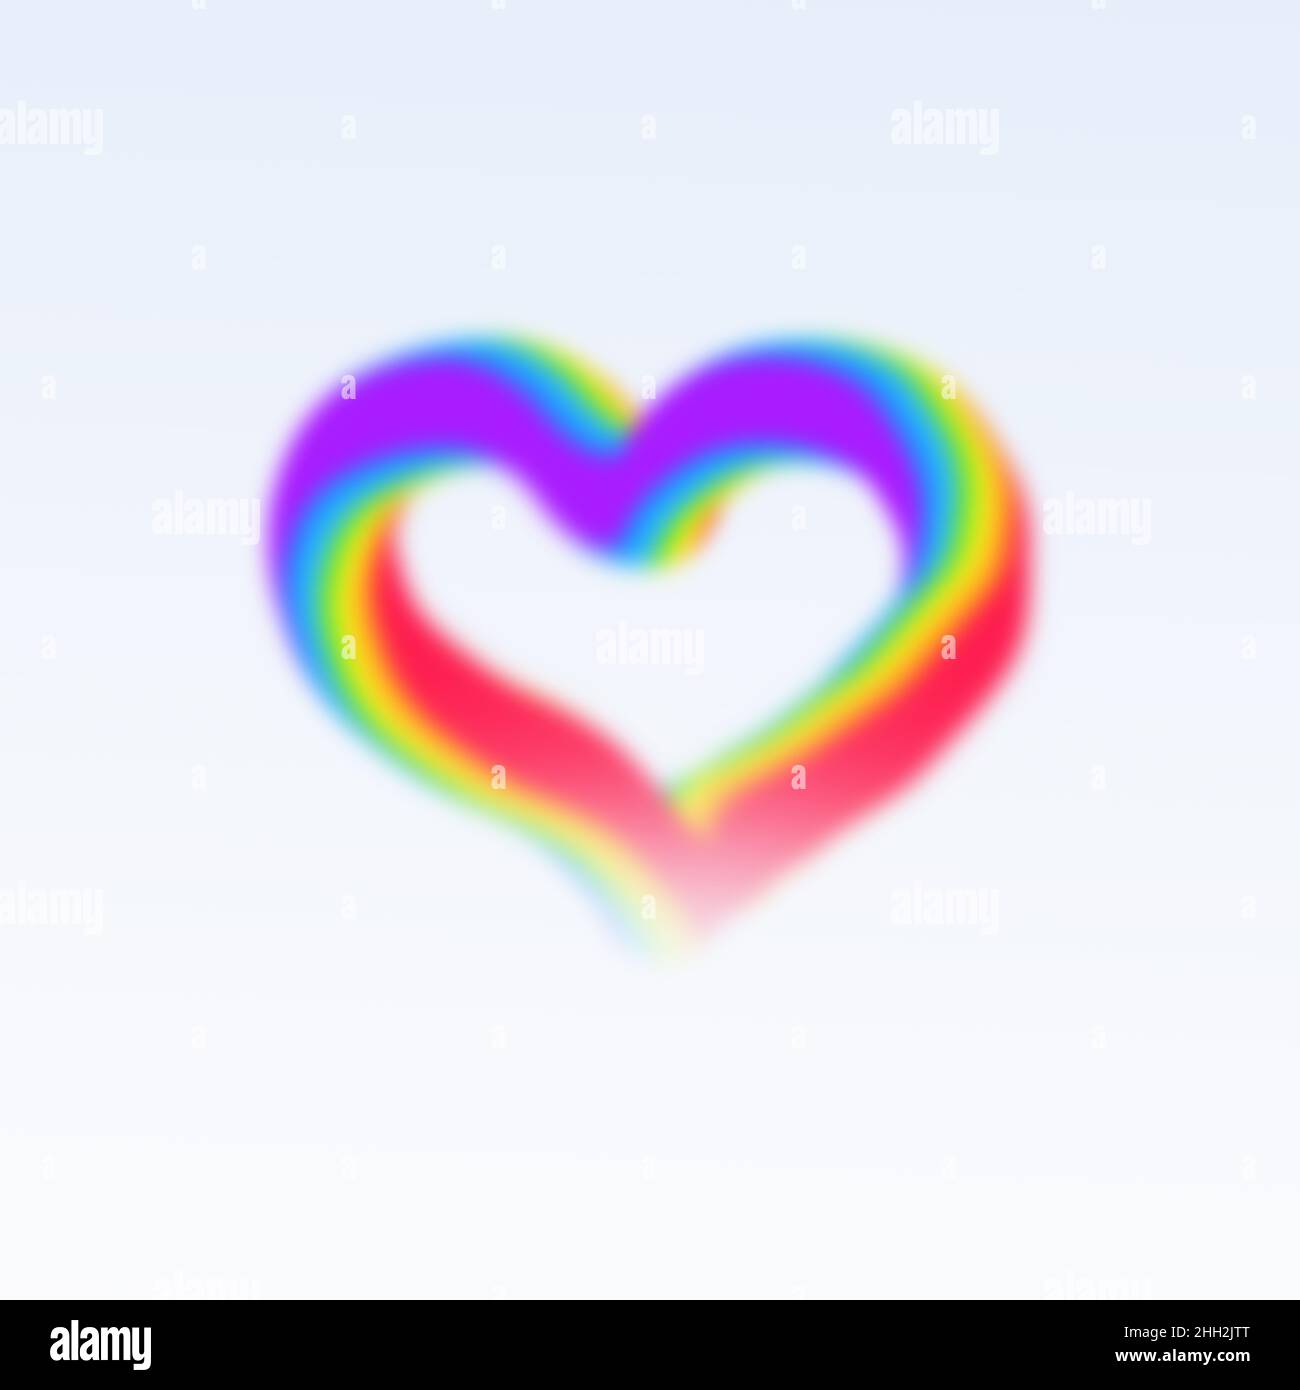 Heart shaped Rainbow on a white background for valentines day. Stock Photo